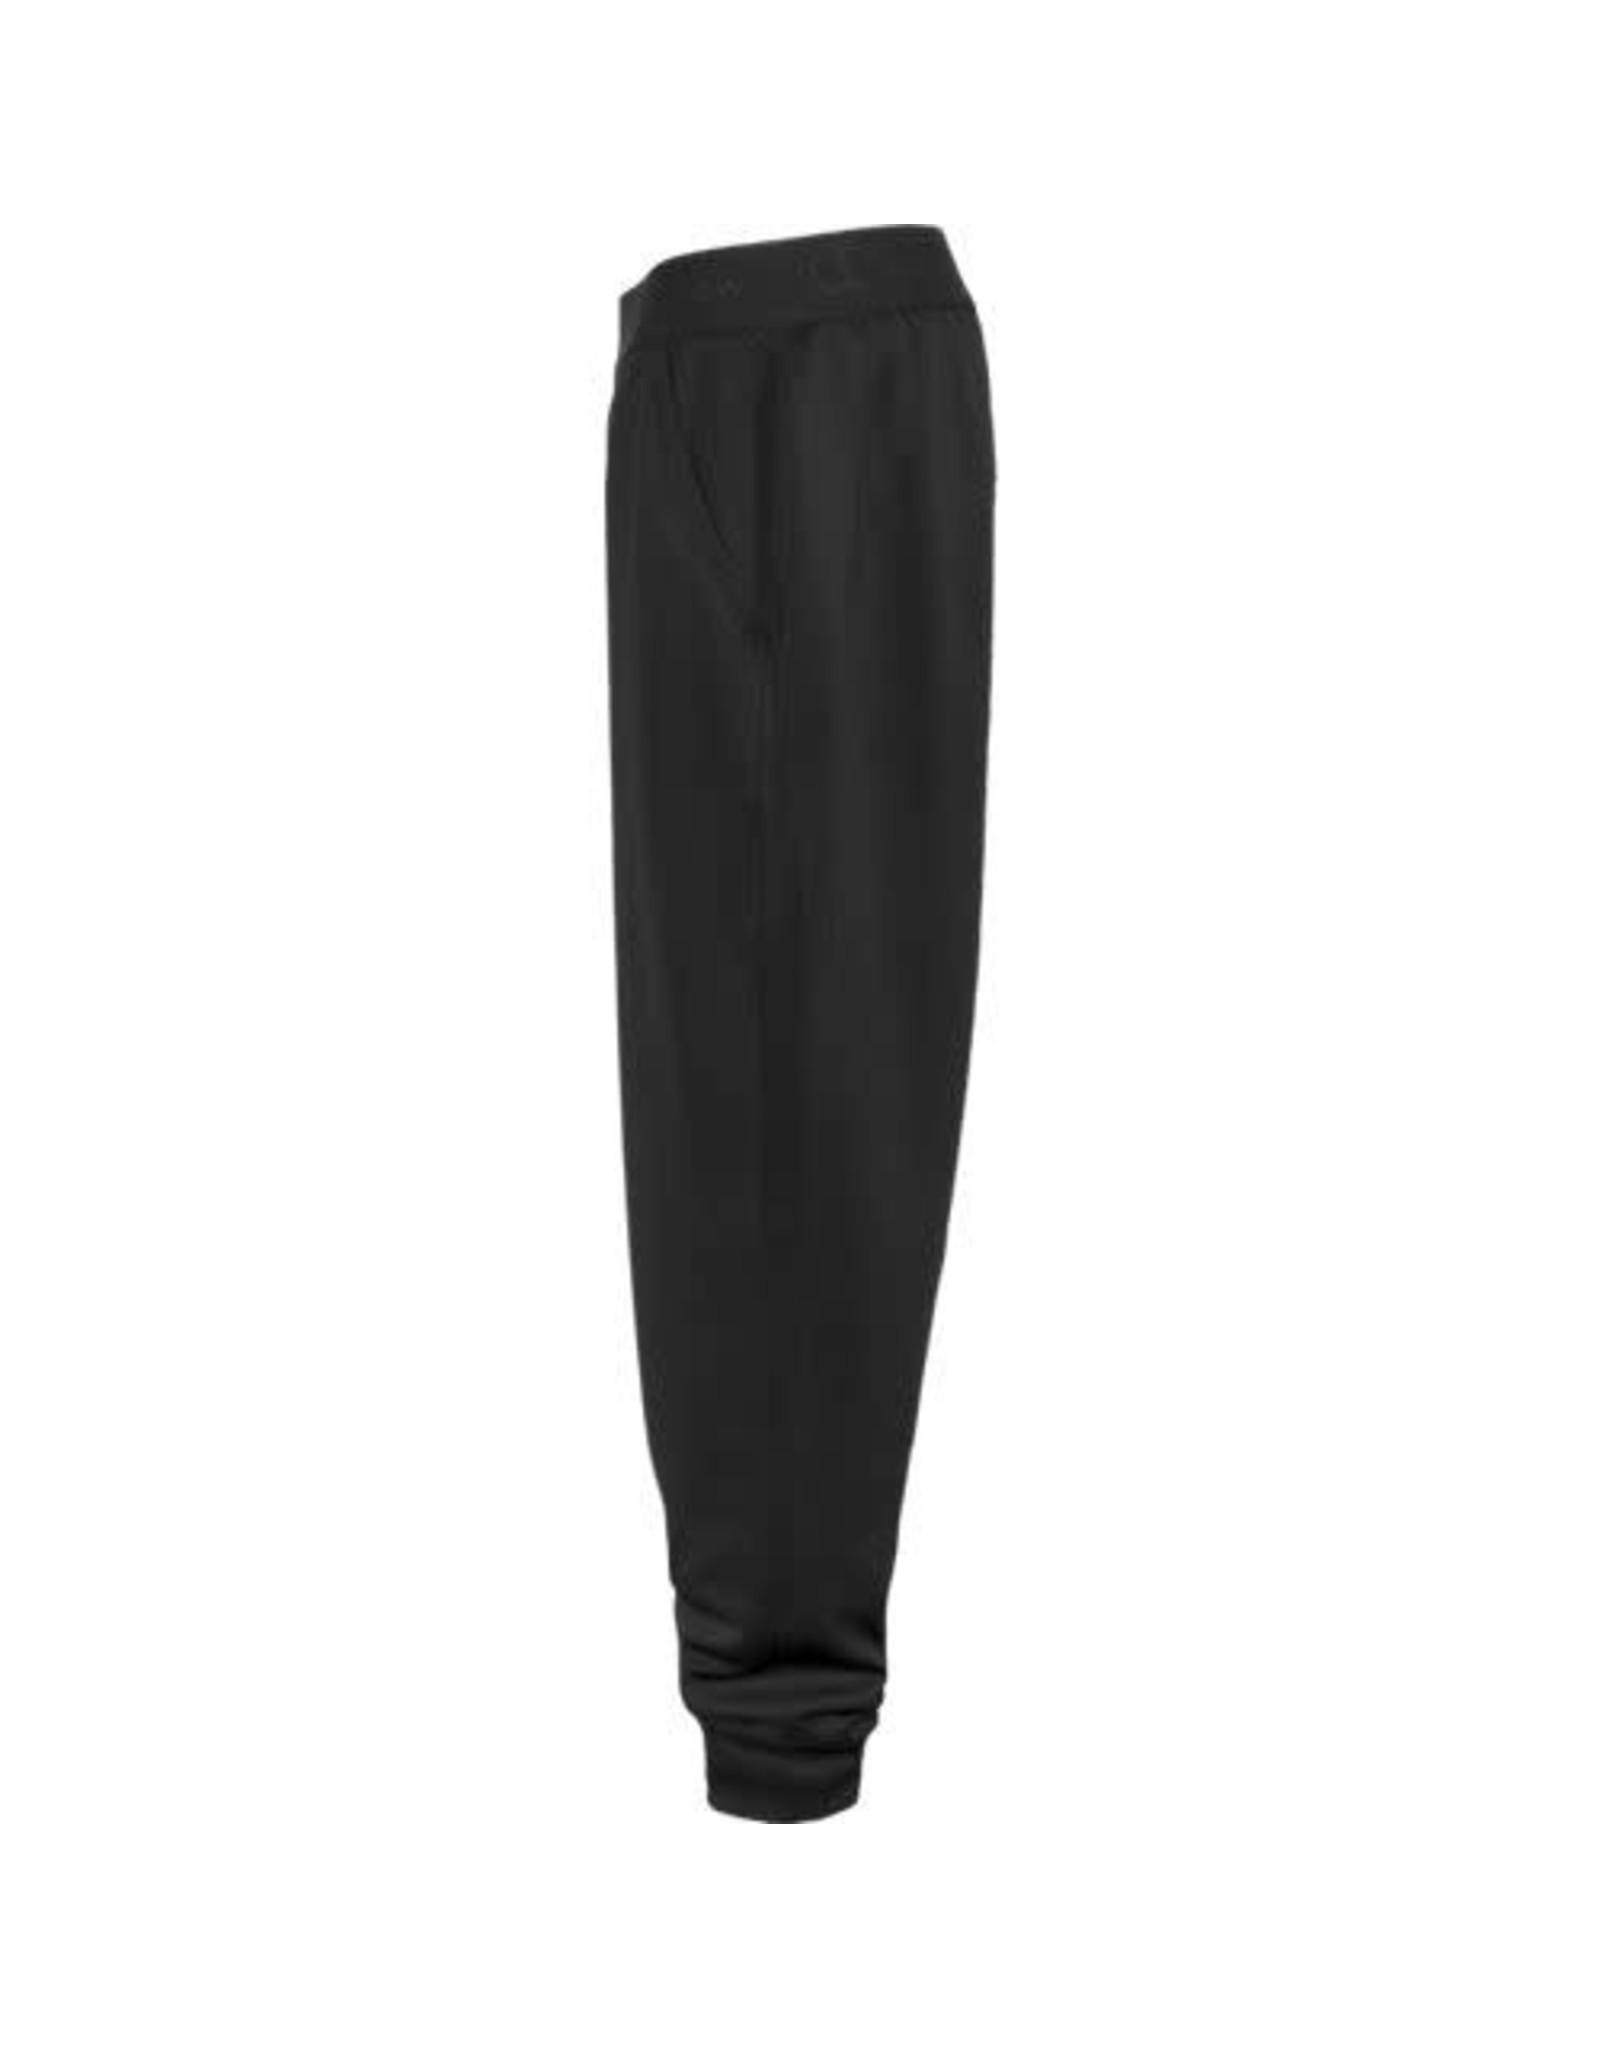 Surge Jogger Black - 0514 - Soles and Suits Athletic Apparel